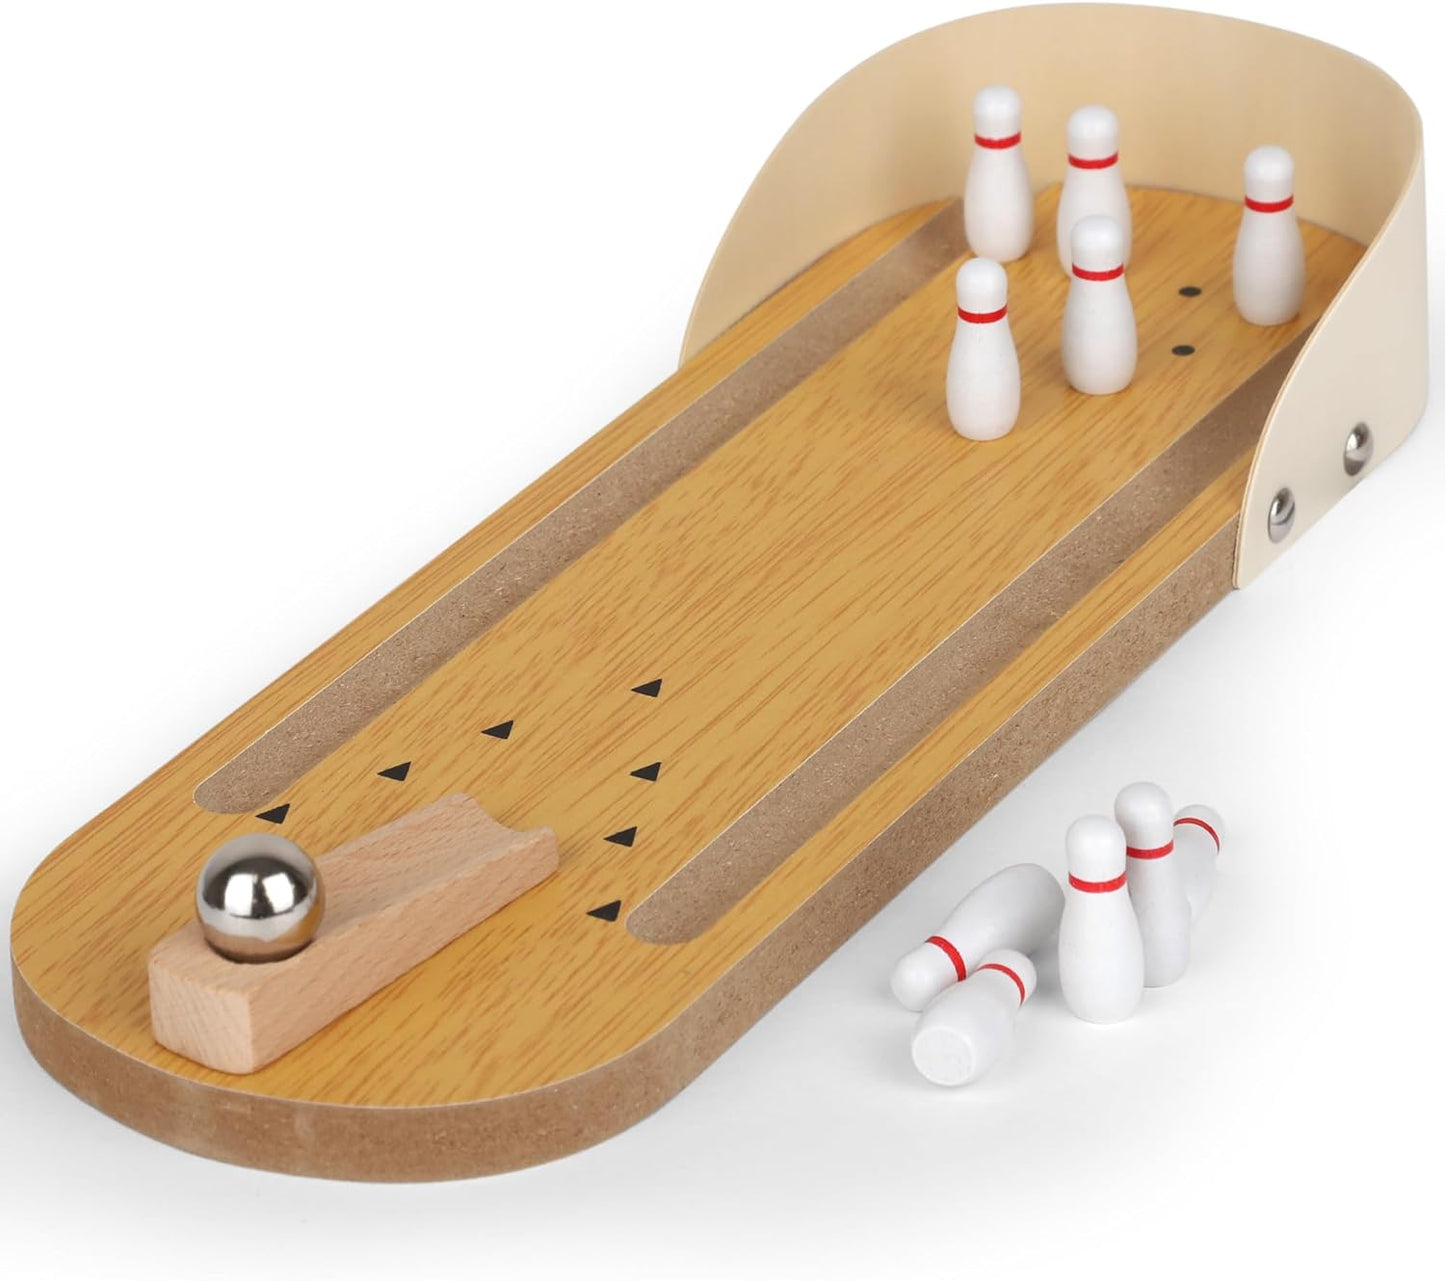 Wooden Mini Bowling Game Toy